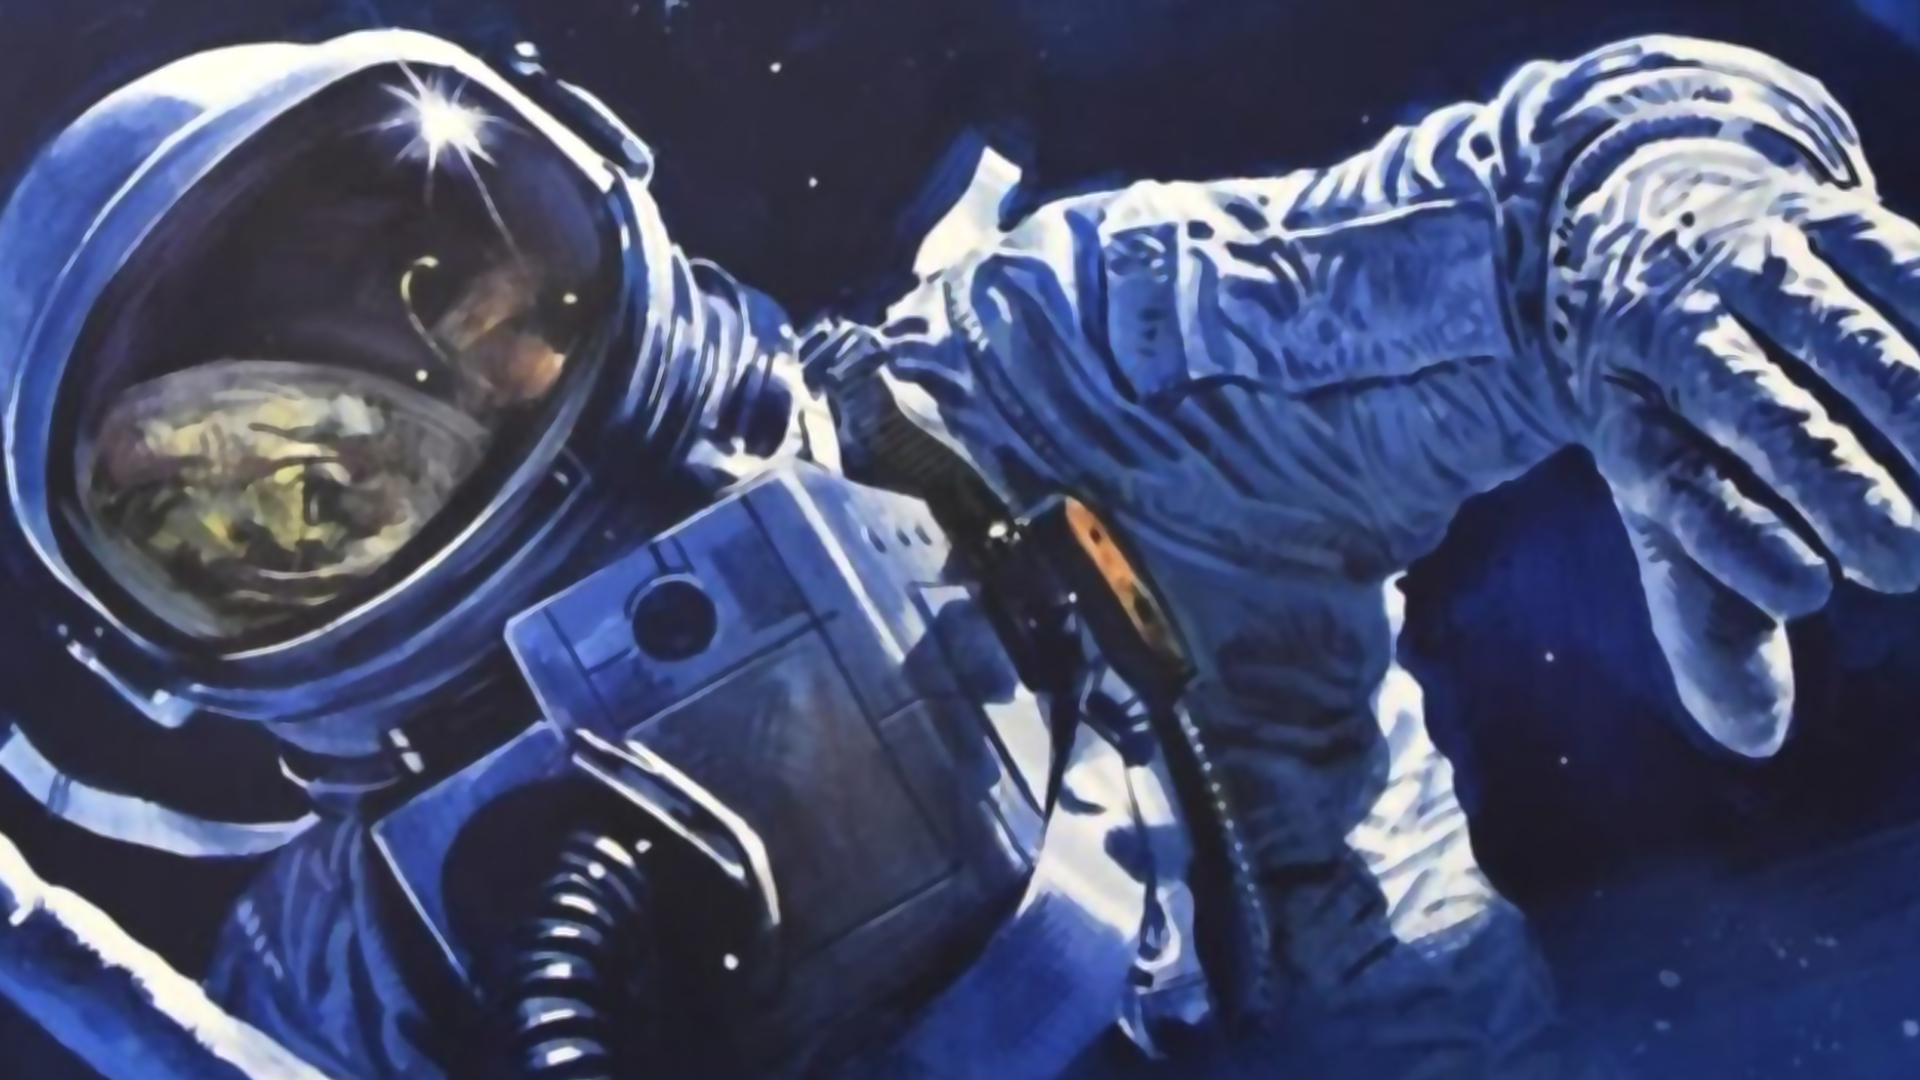 A close-up of an astronaut floating through space with one hand reaching out towards the foreground.